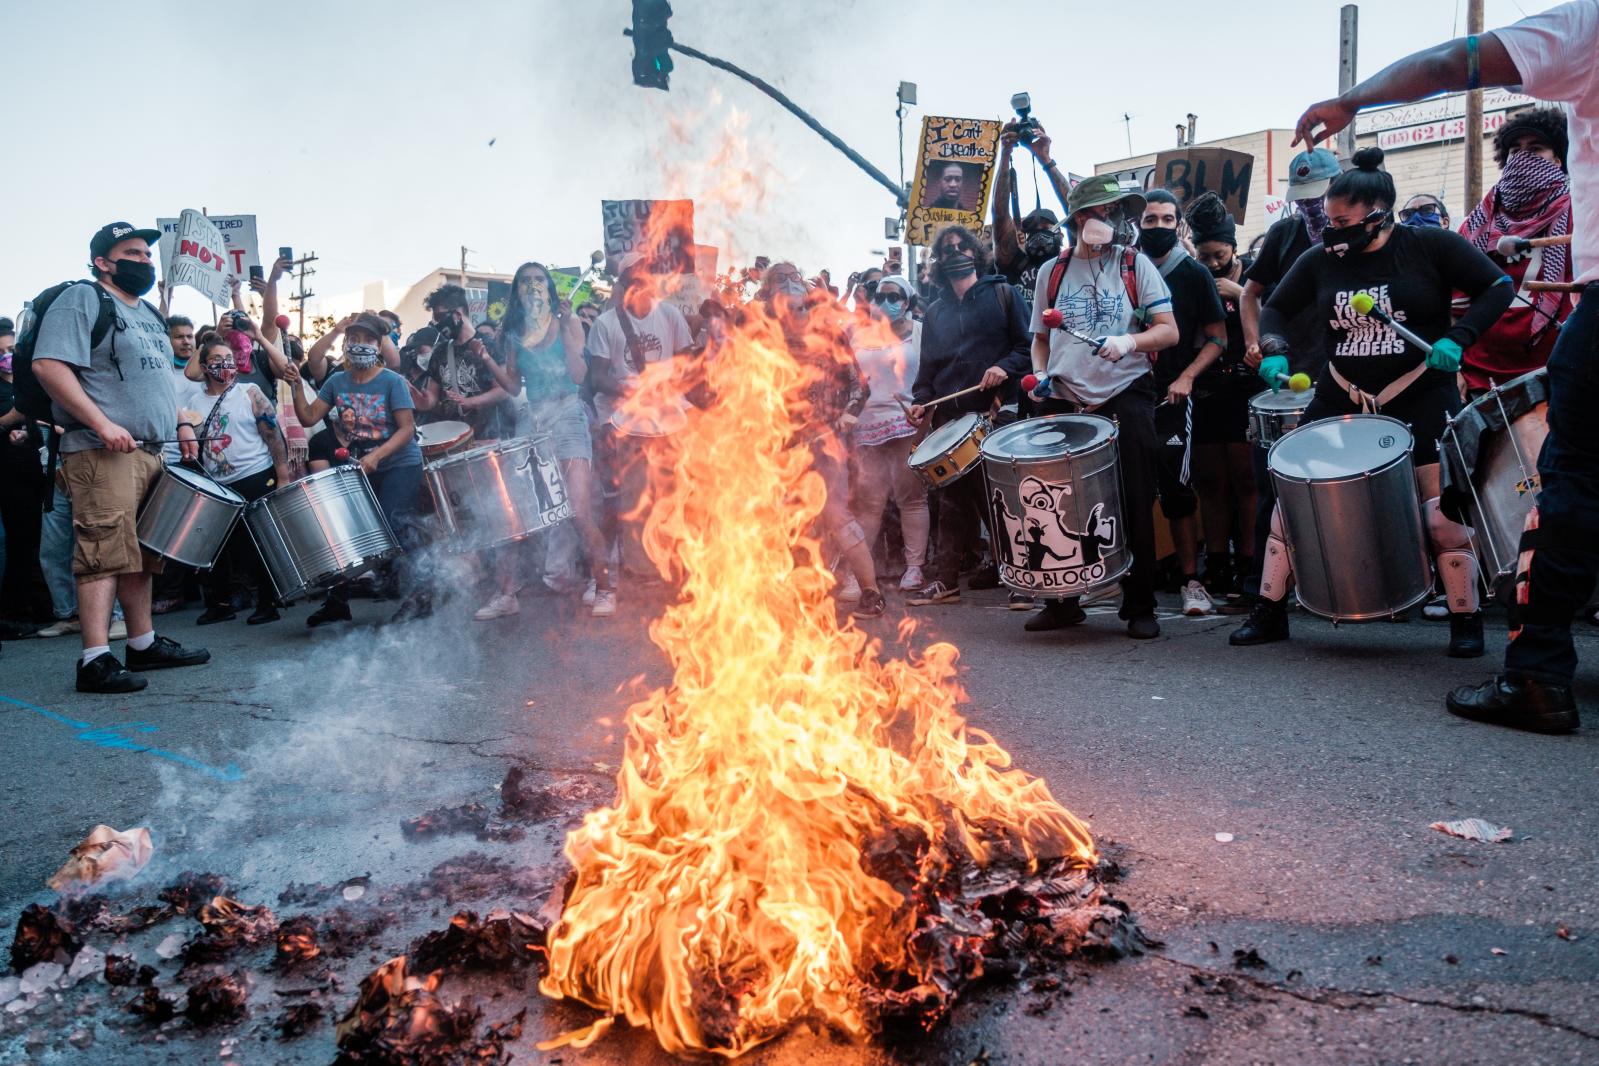 Image from NEWS - People drum and dance around a small fire at the end of a...